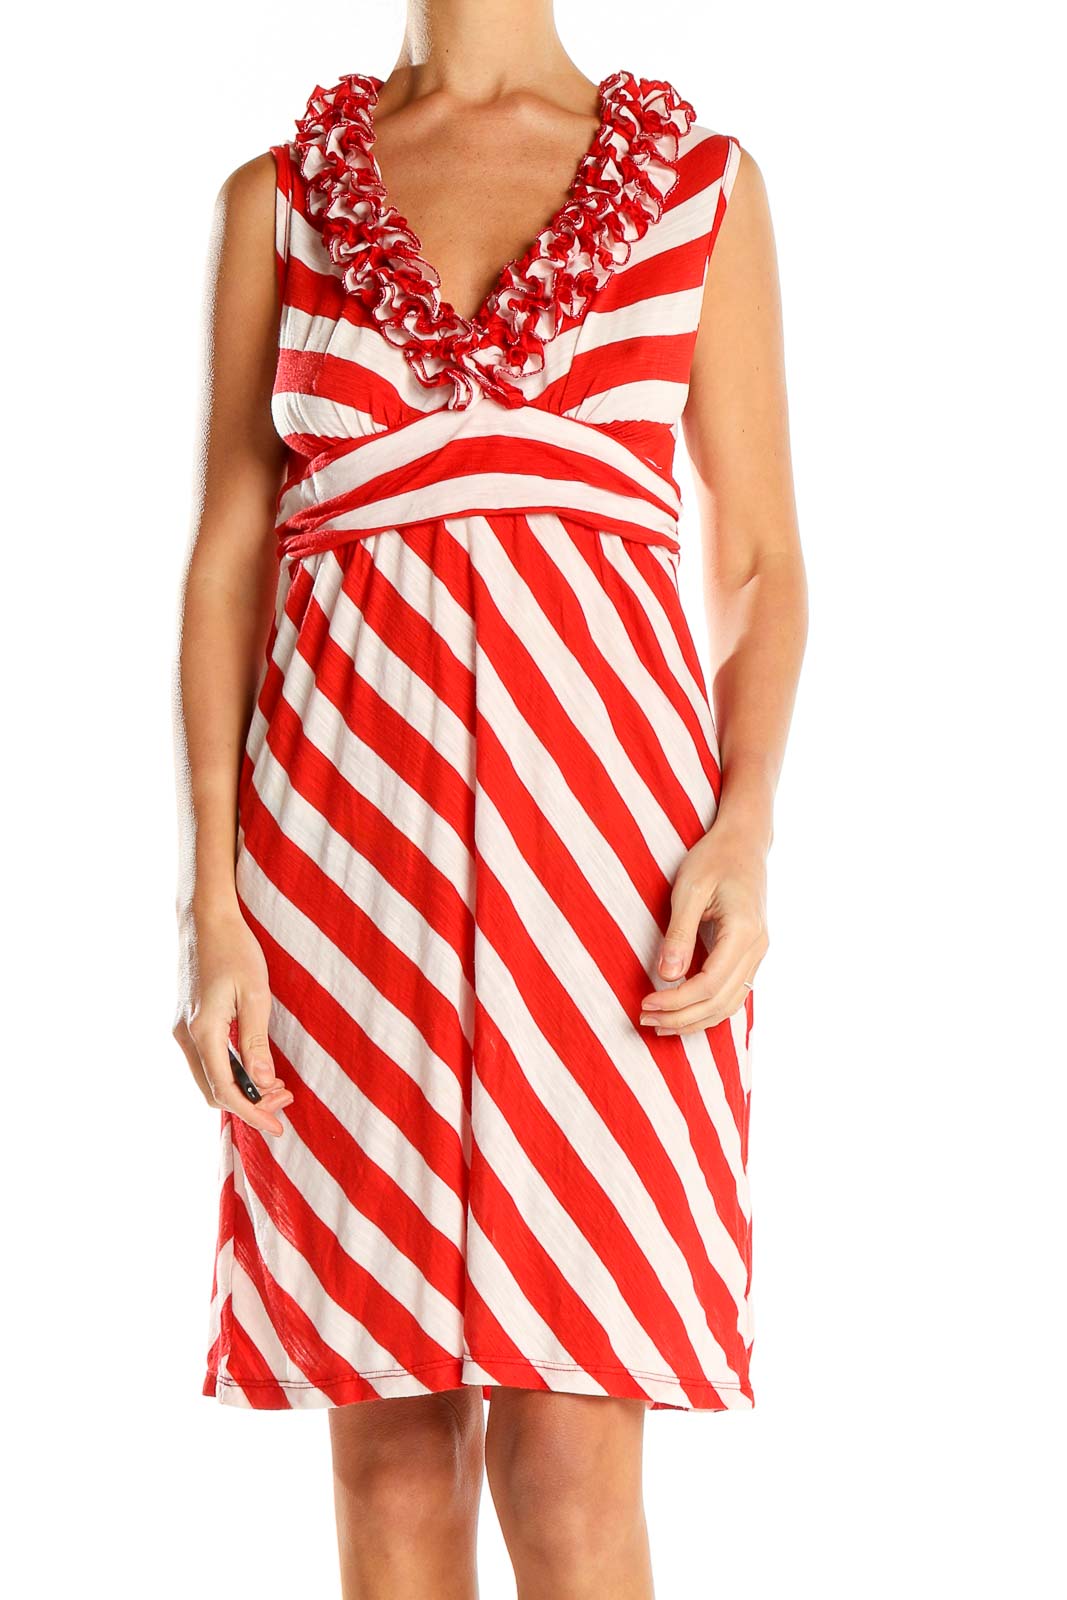 Red Striped Dress Front